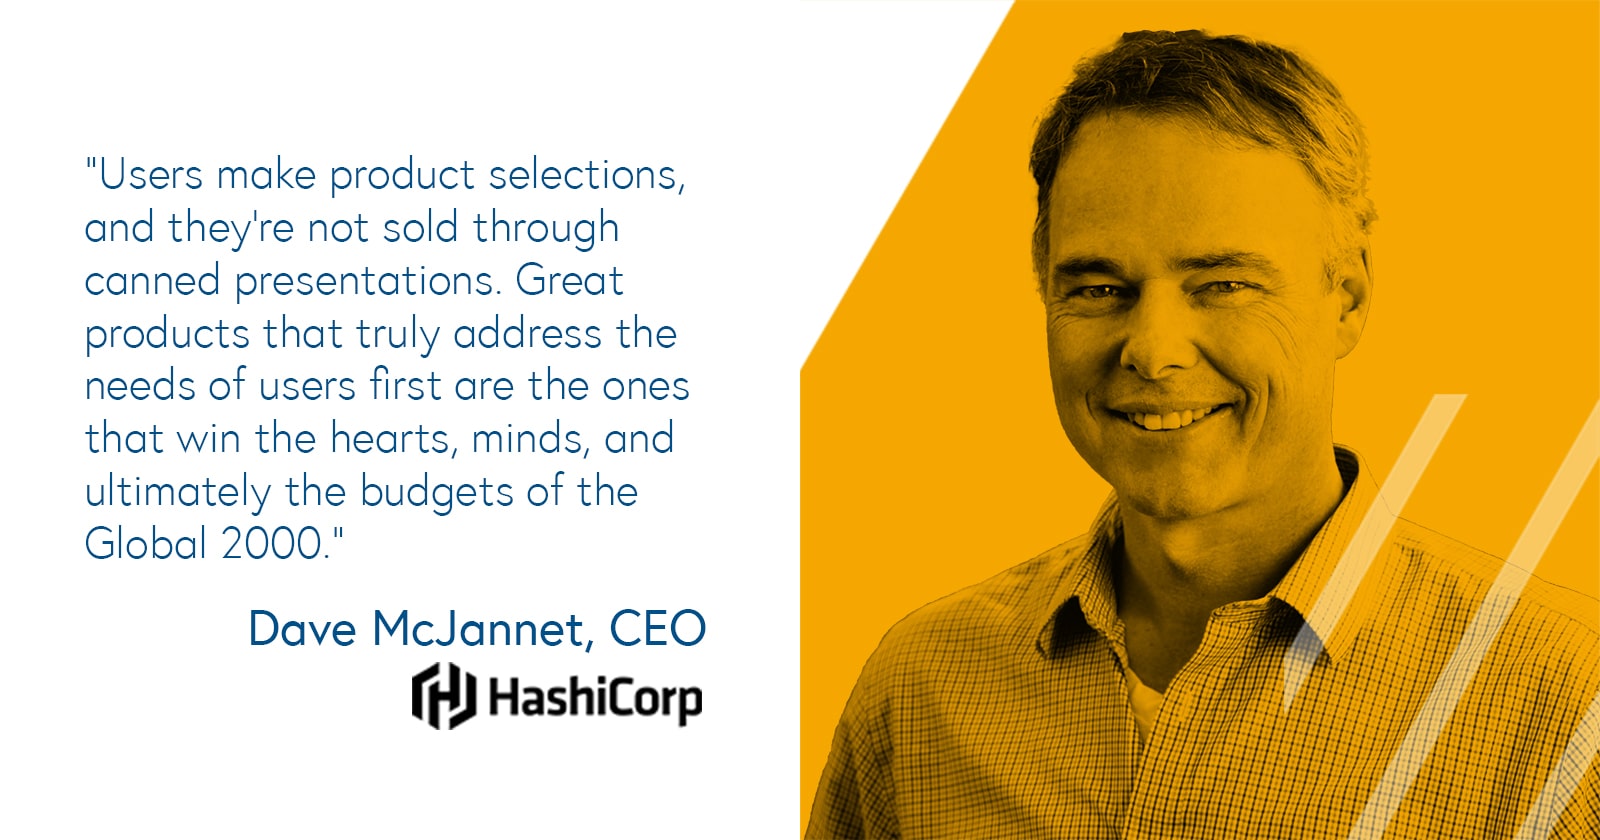 Dave McJannet, CEO of HashiCorp on building great user-centric products 